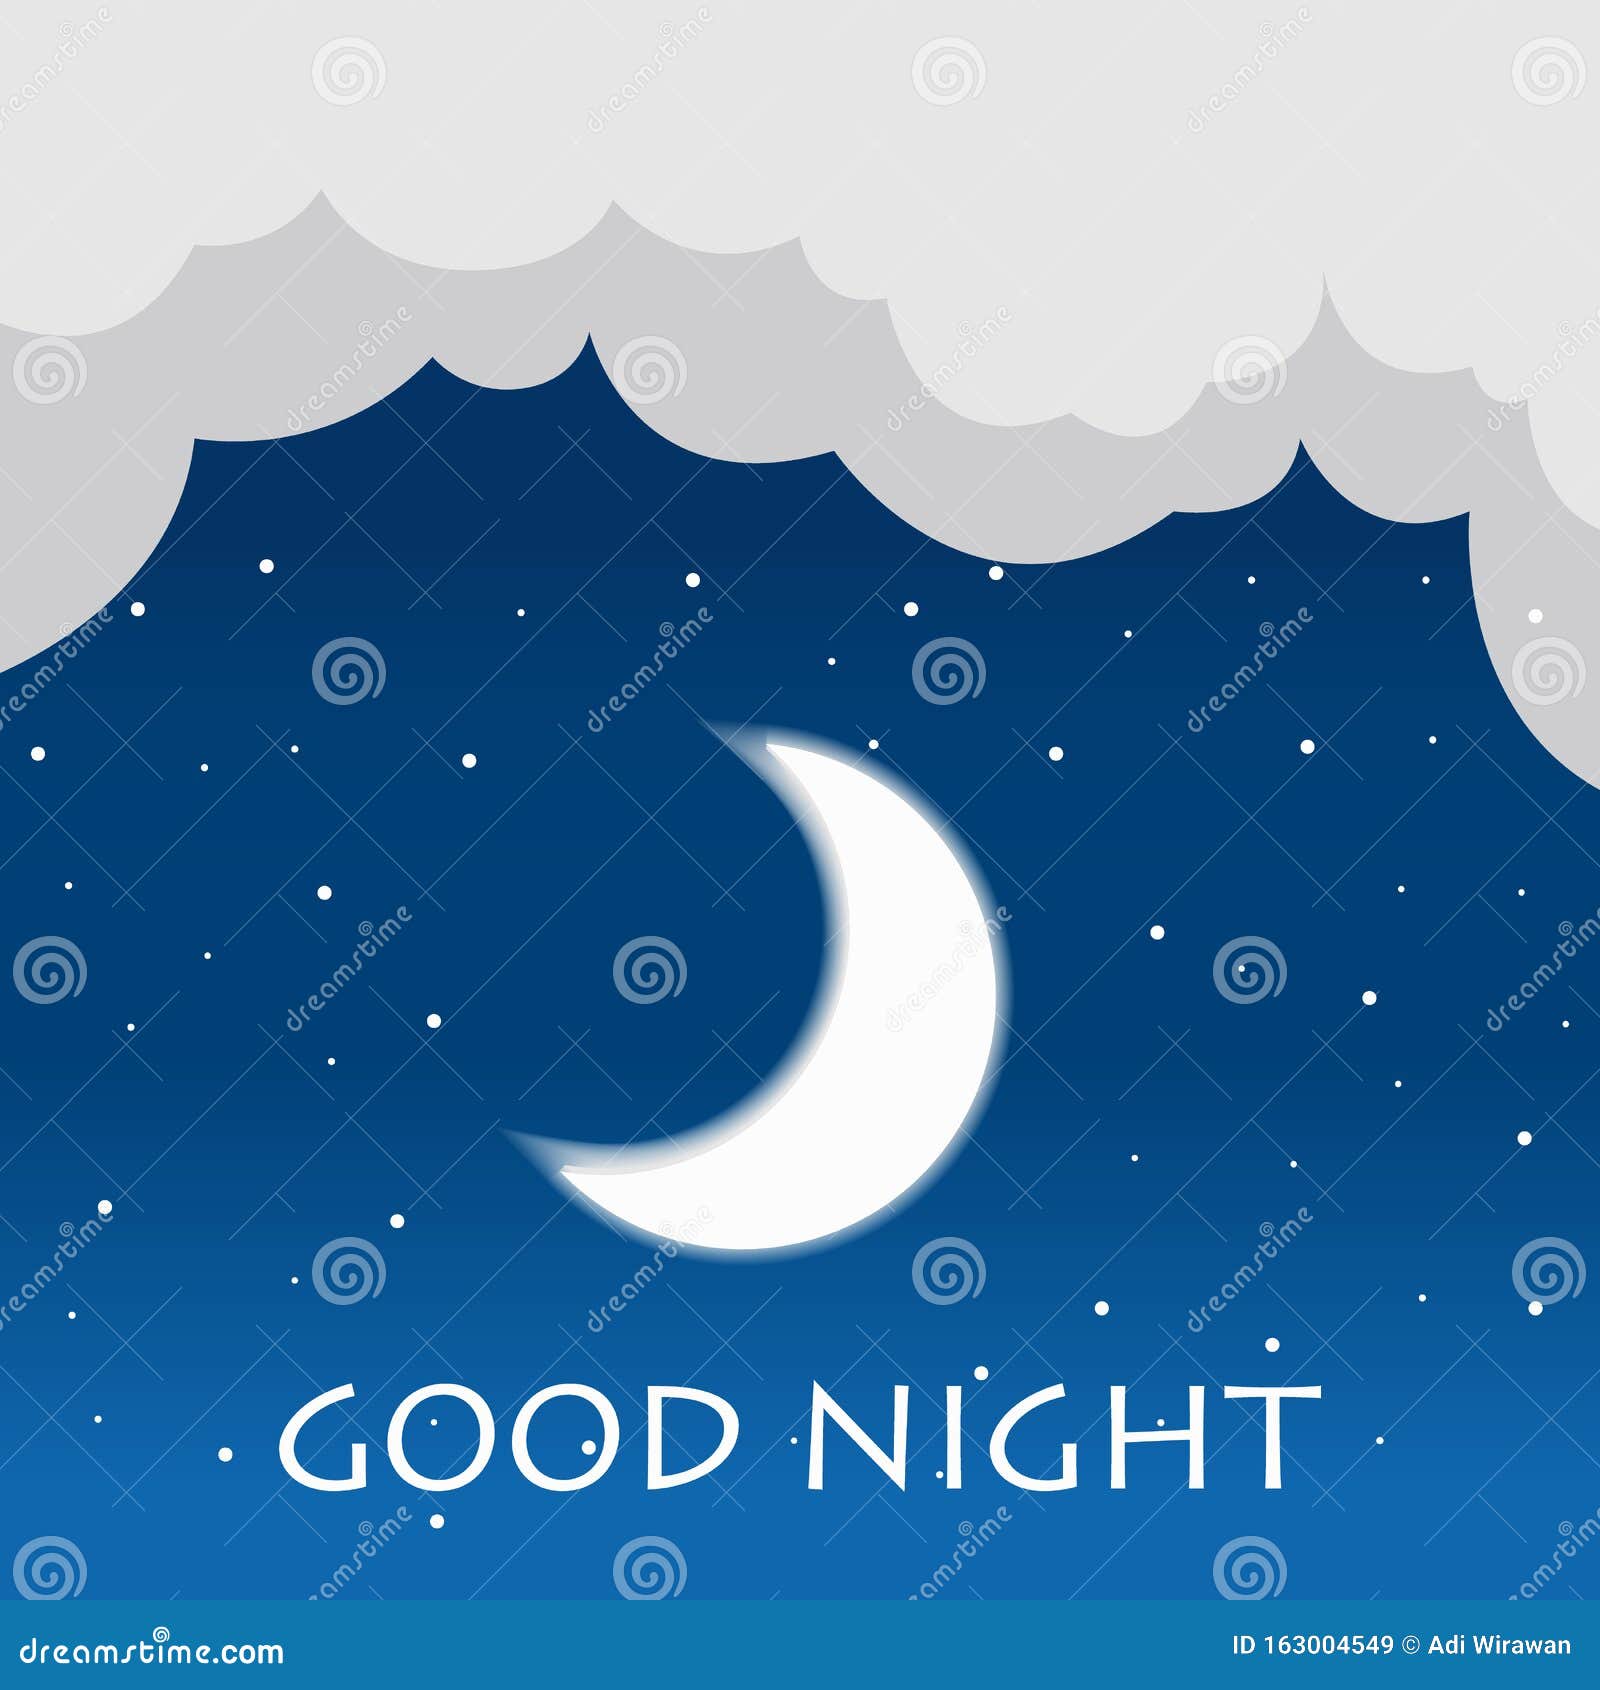 Good Night. Hand Drawn Typography Poster. Card Good Night Vector Image ...